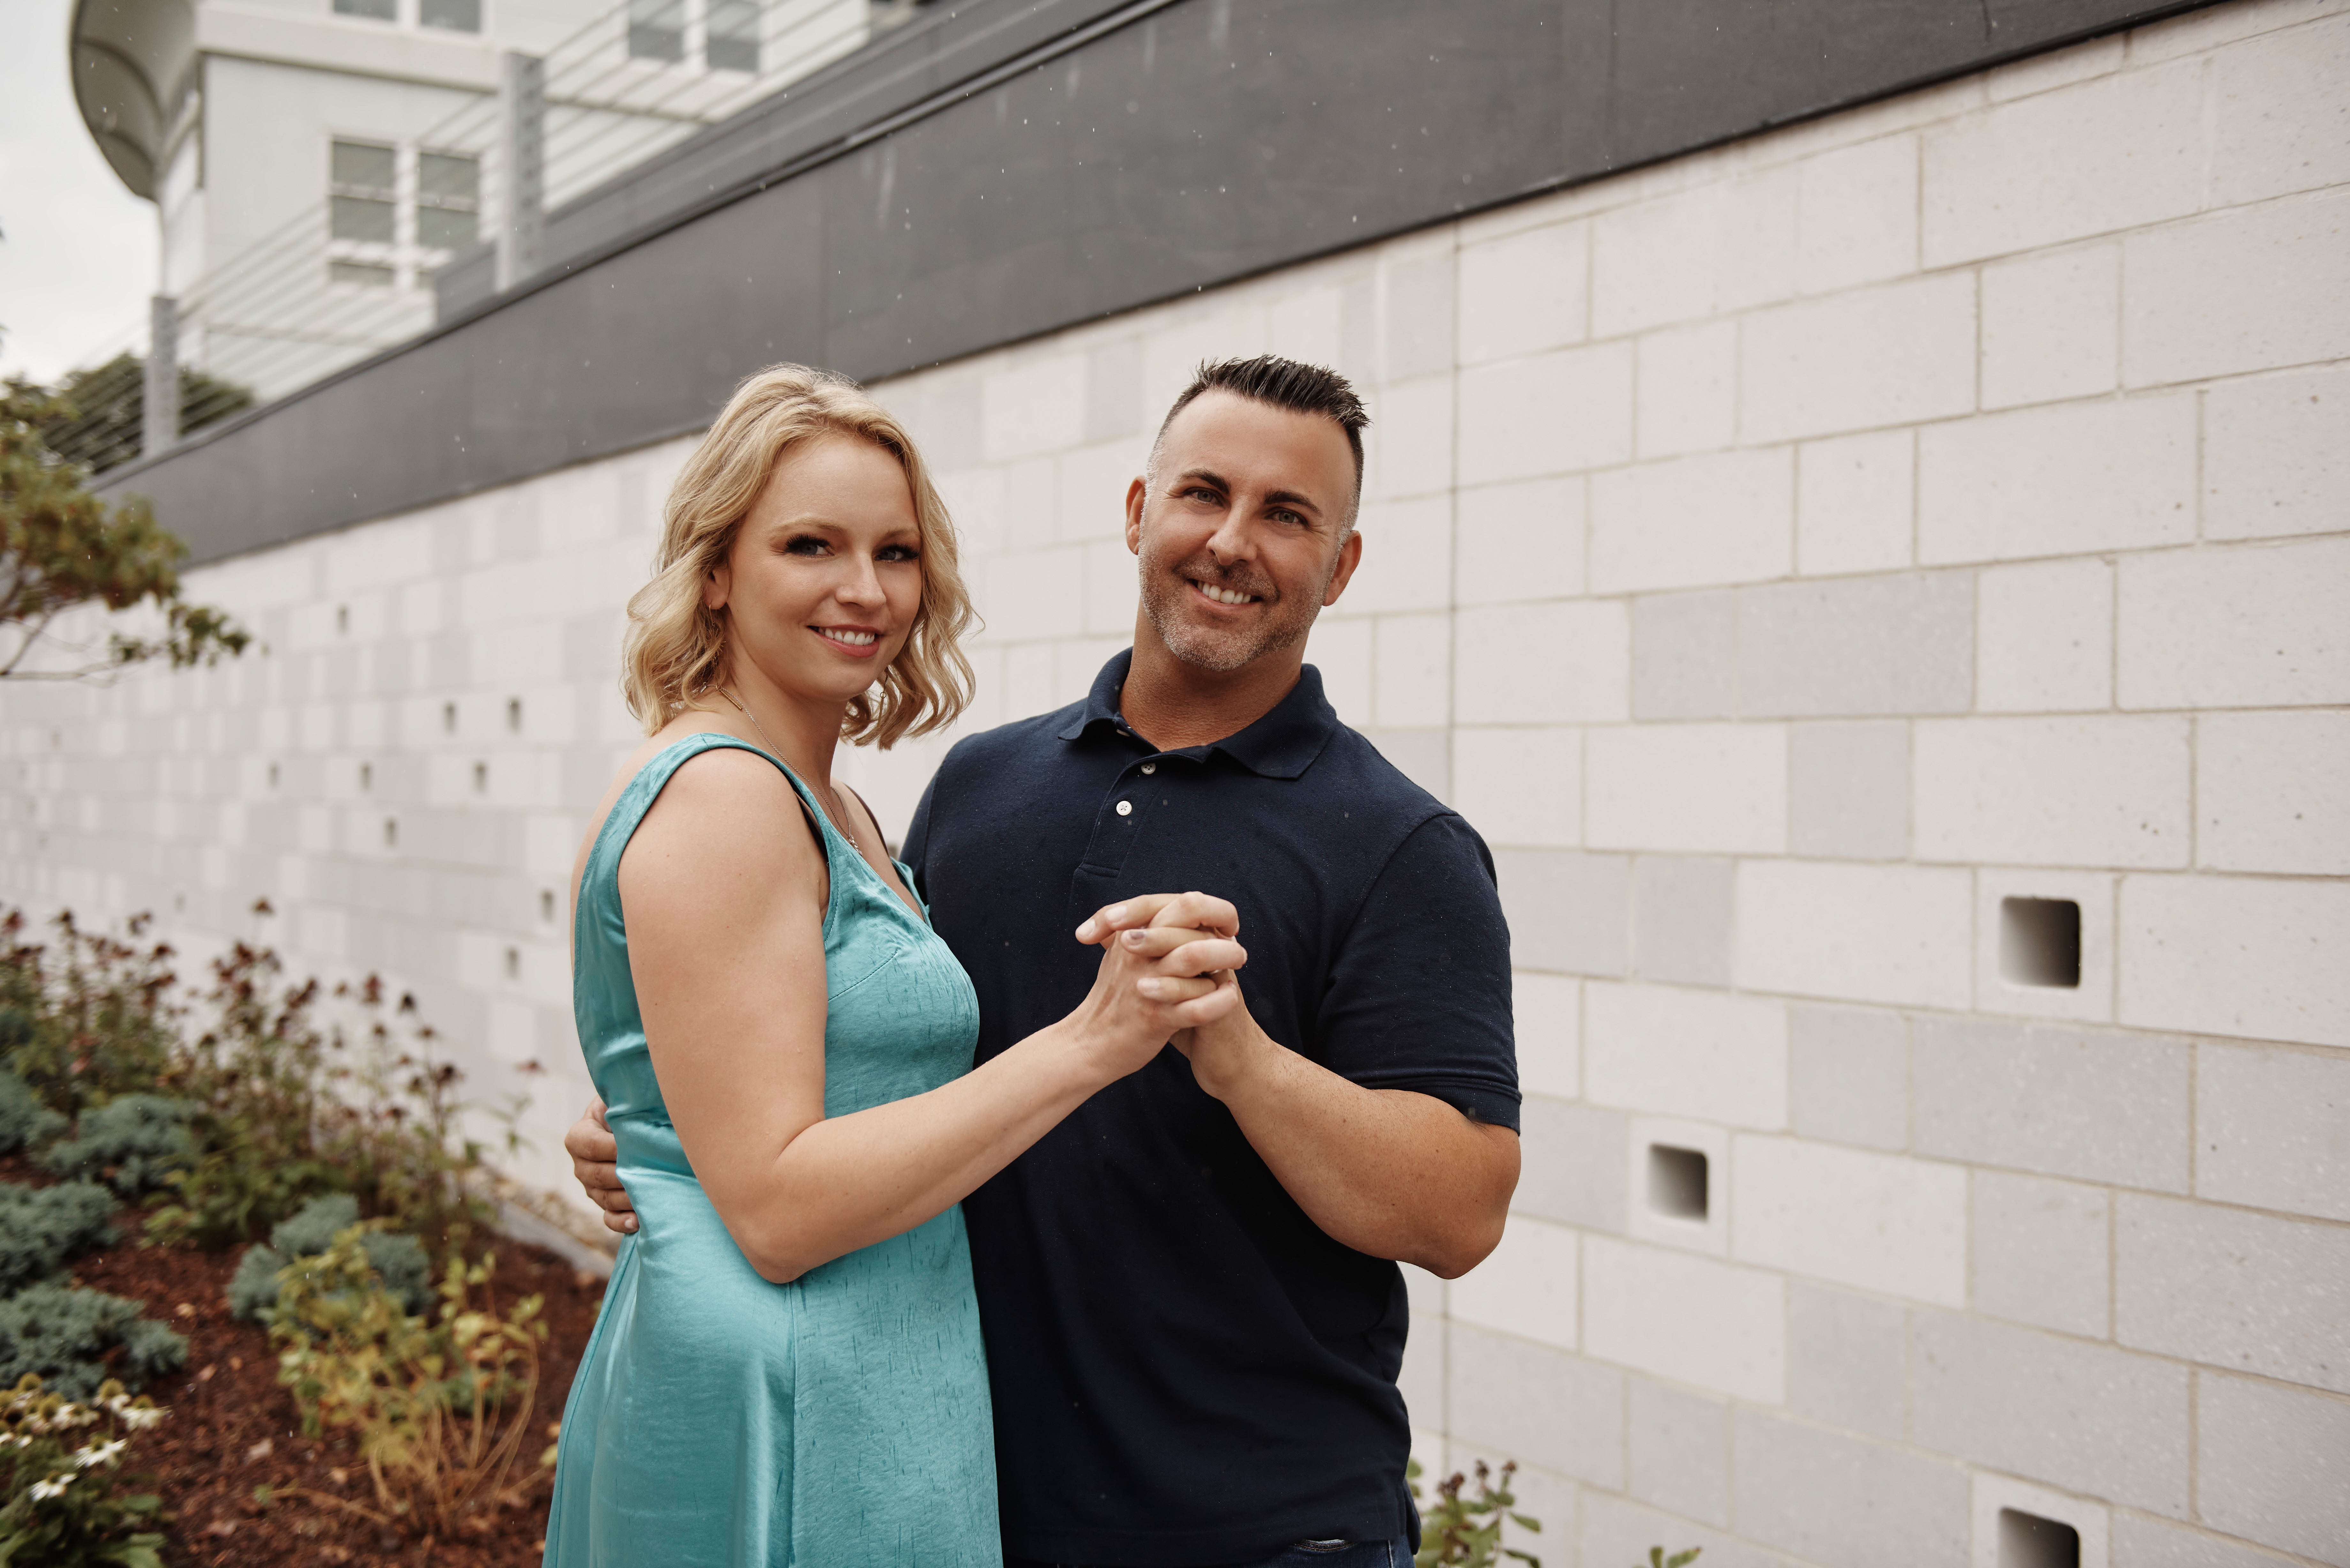 Lindsay and Mark, one of the 'Married at First Sight' couples from season 14, holding hands